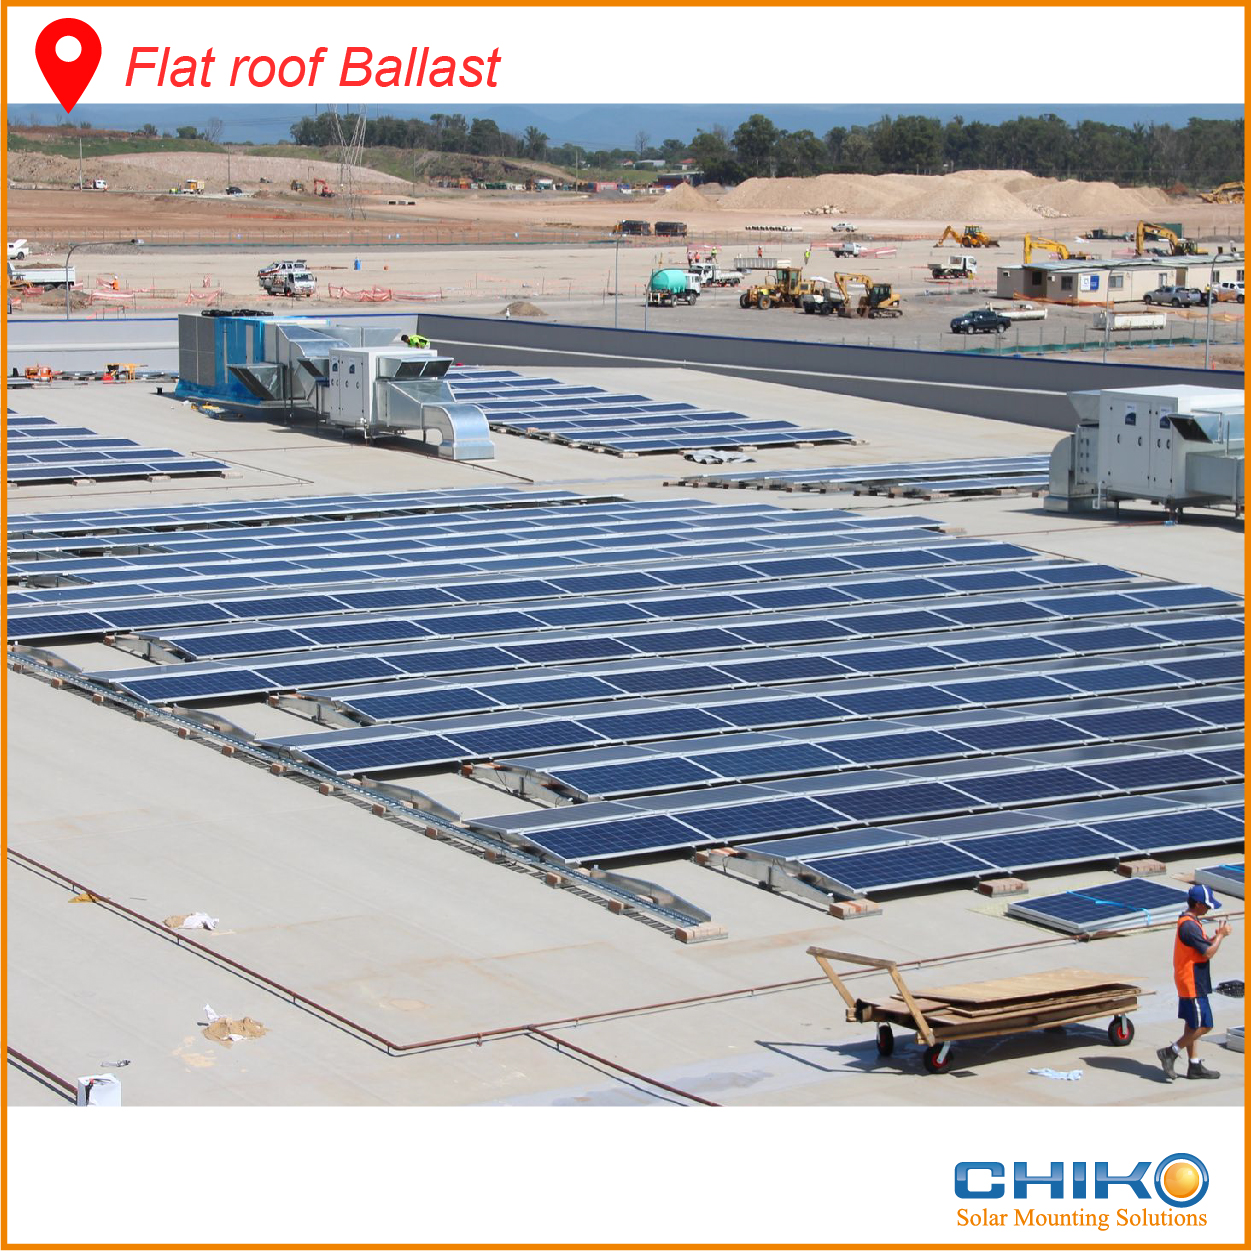 How do commercial flat roofs utilize solar mounting systems?